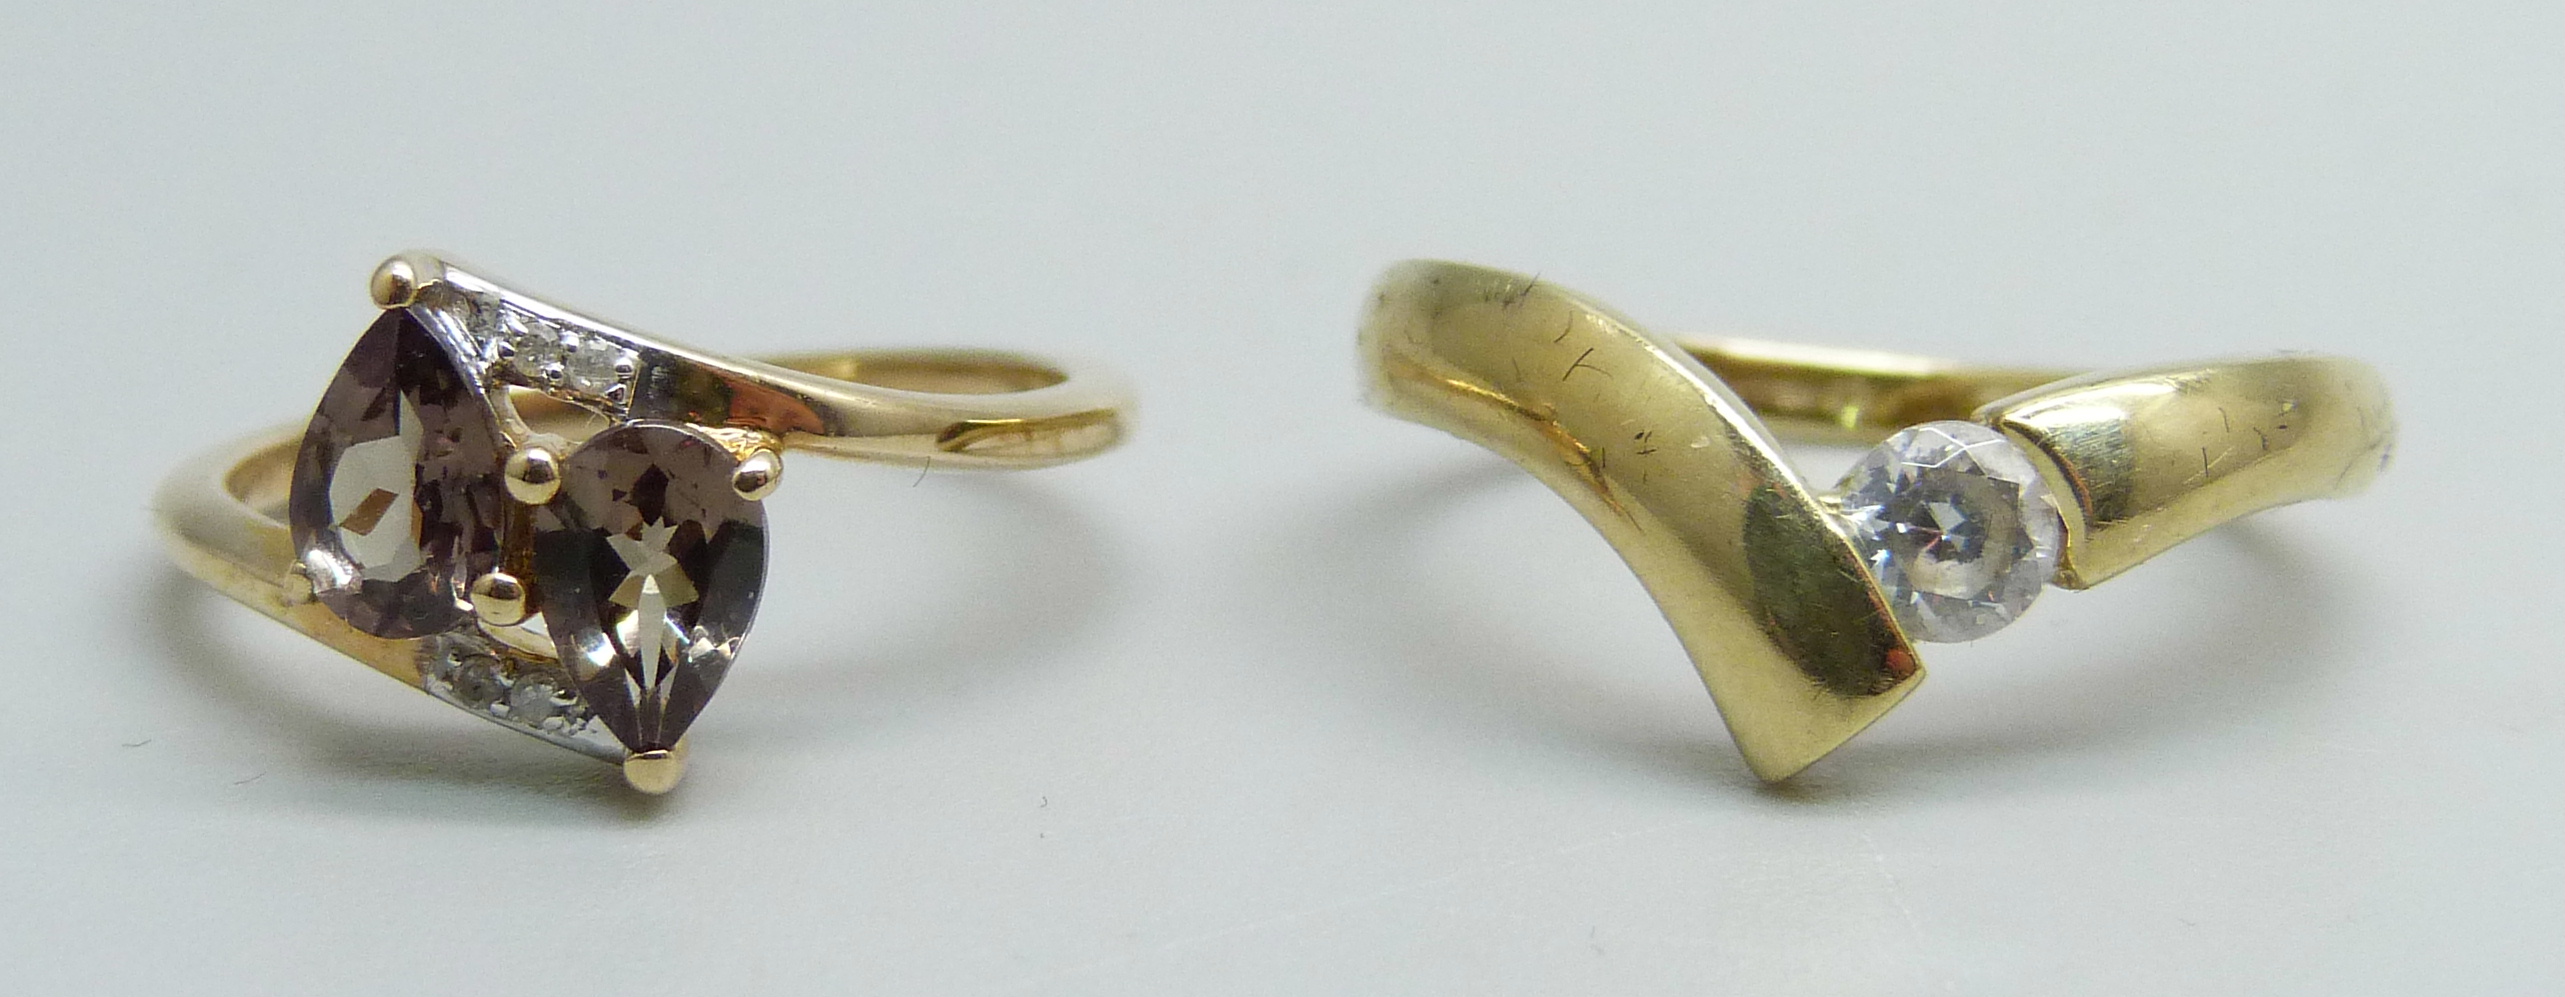 A 14ct gold solitaire ring, 2.1g, M, and a 10k gold crossover ring, 2.1g, L